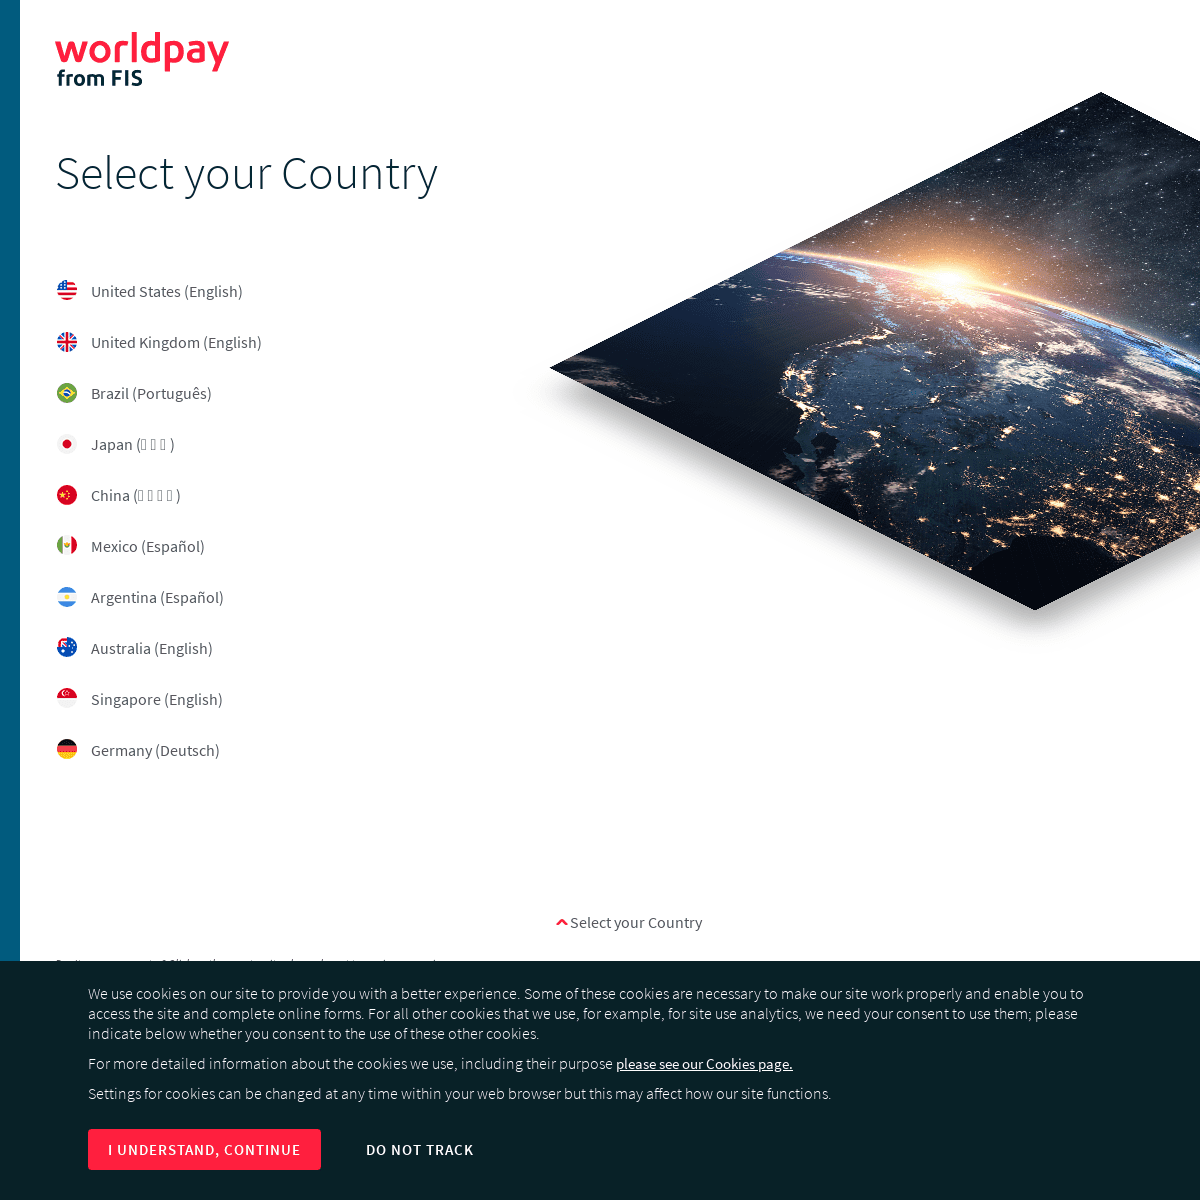 A complete backup of worldpay.com